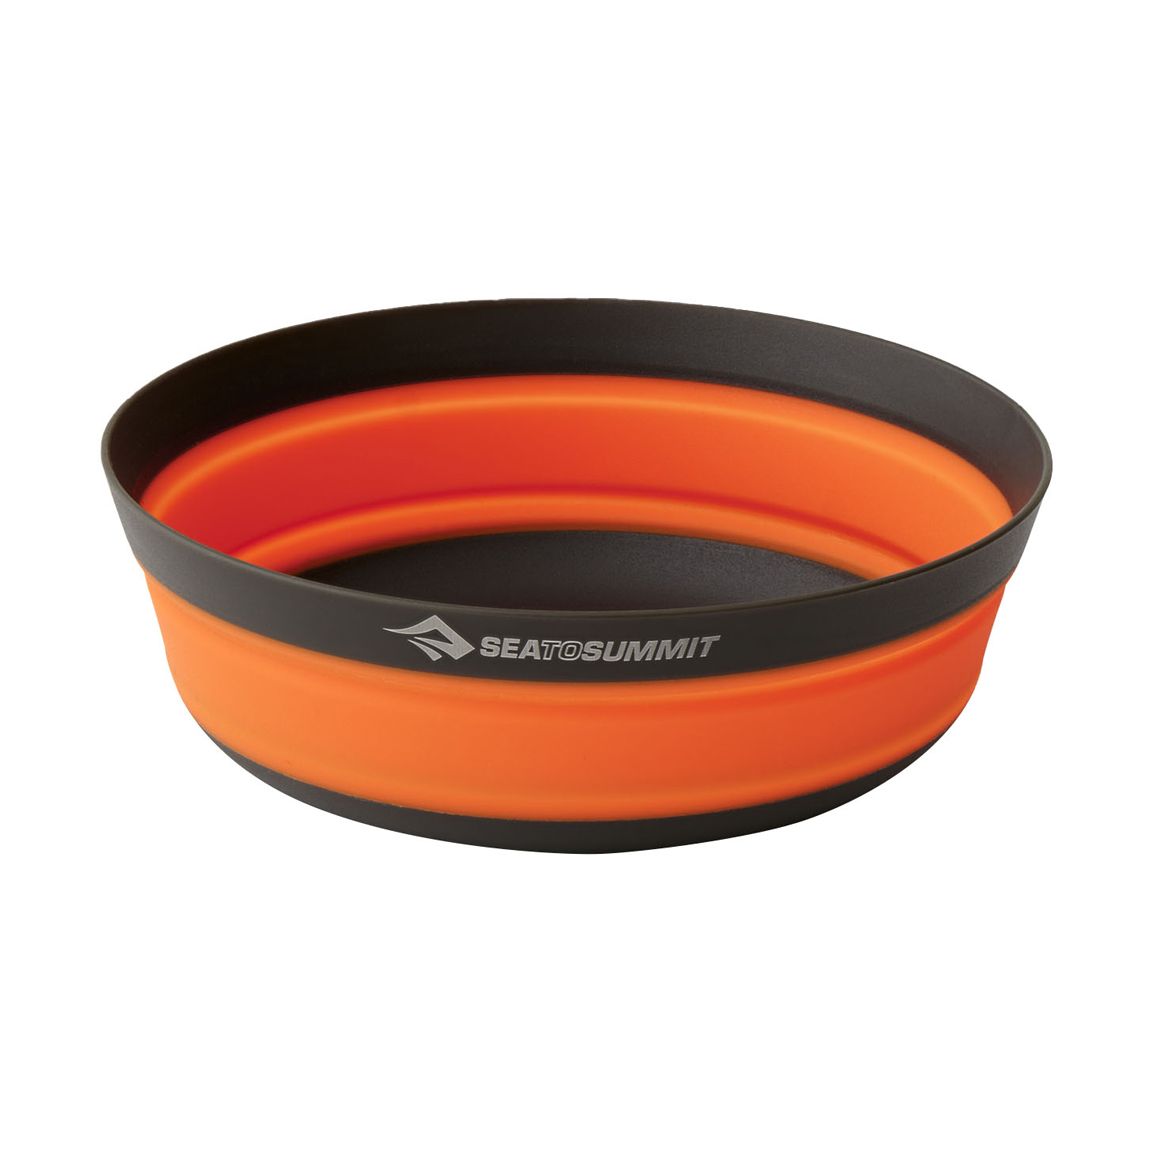 Frontier UL Collapsible Bowl M